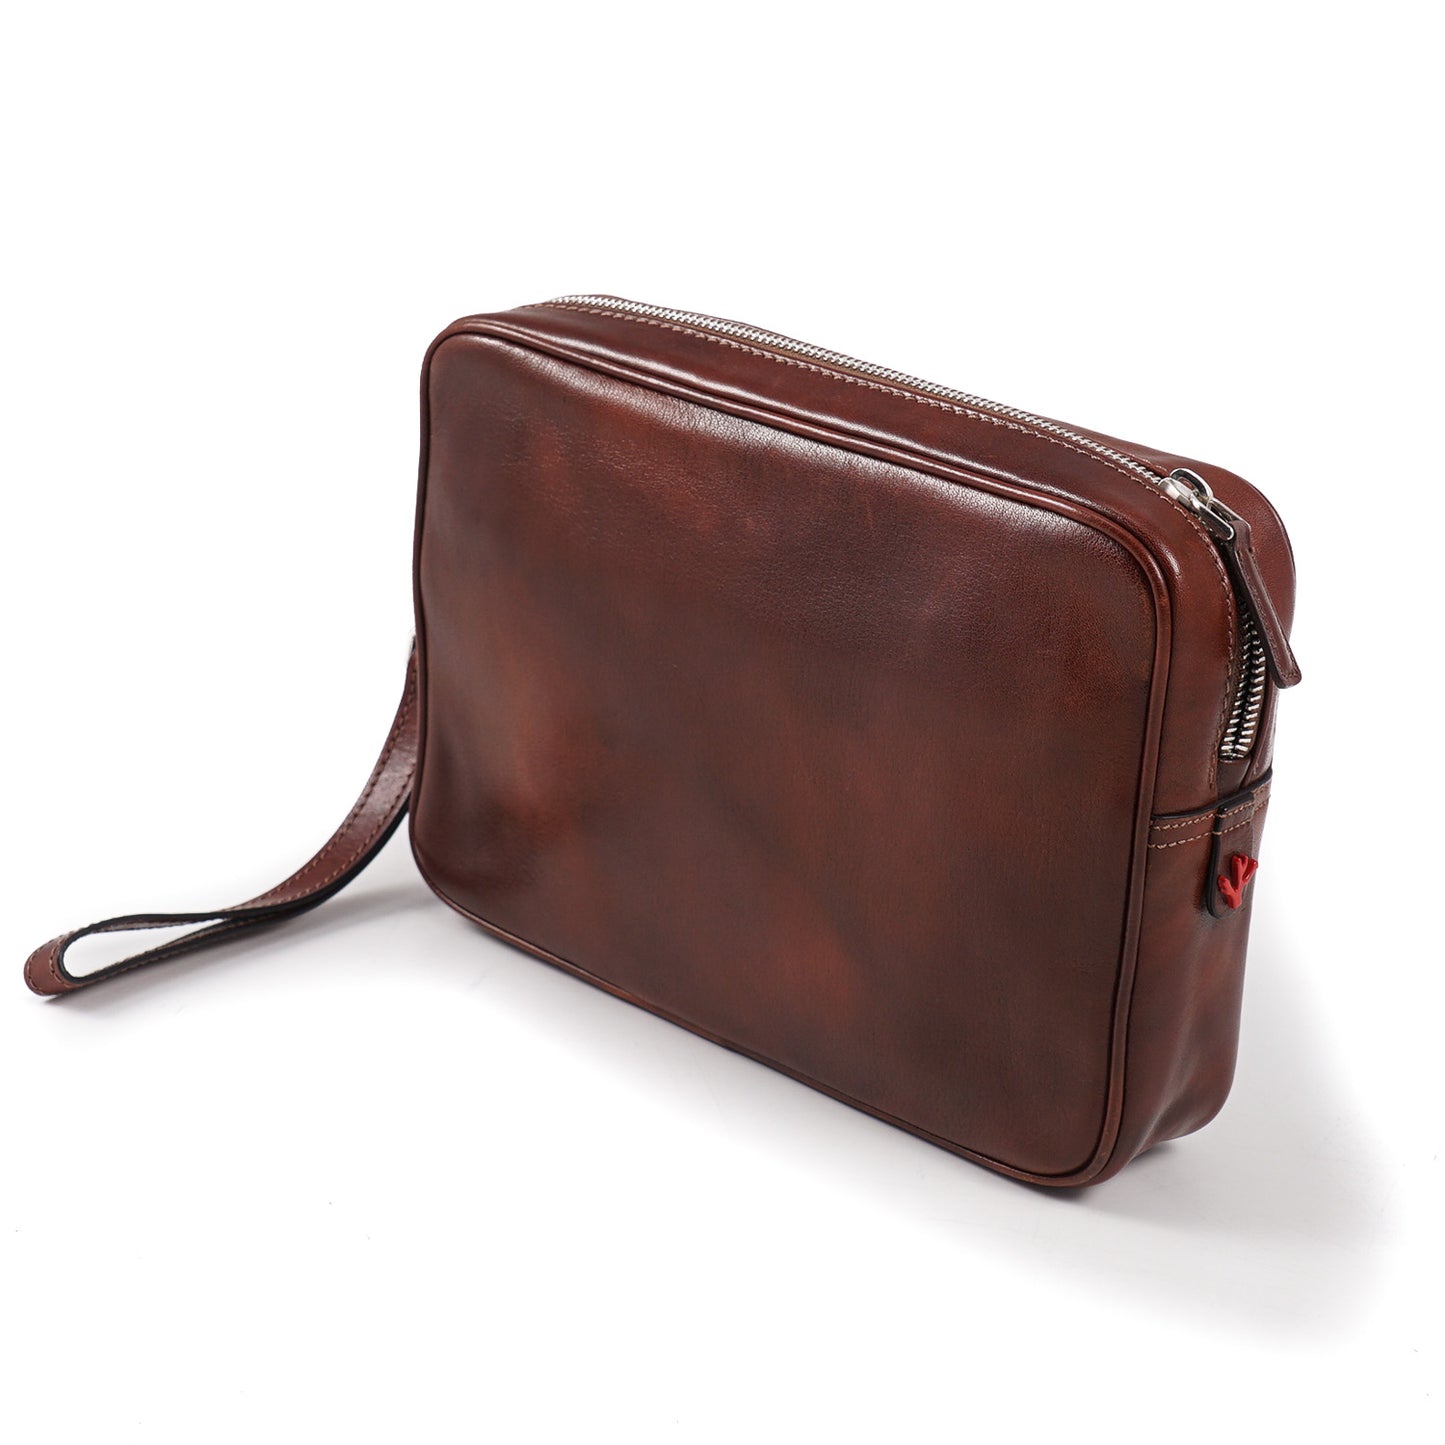 Isaia Antiqued Leather Toiletry Bag - Top Shelf Apparel